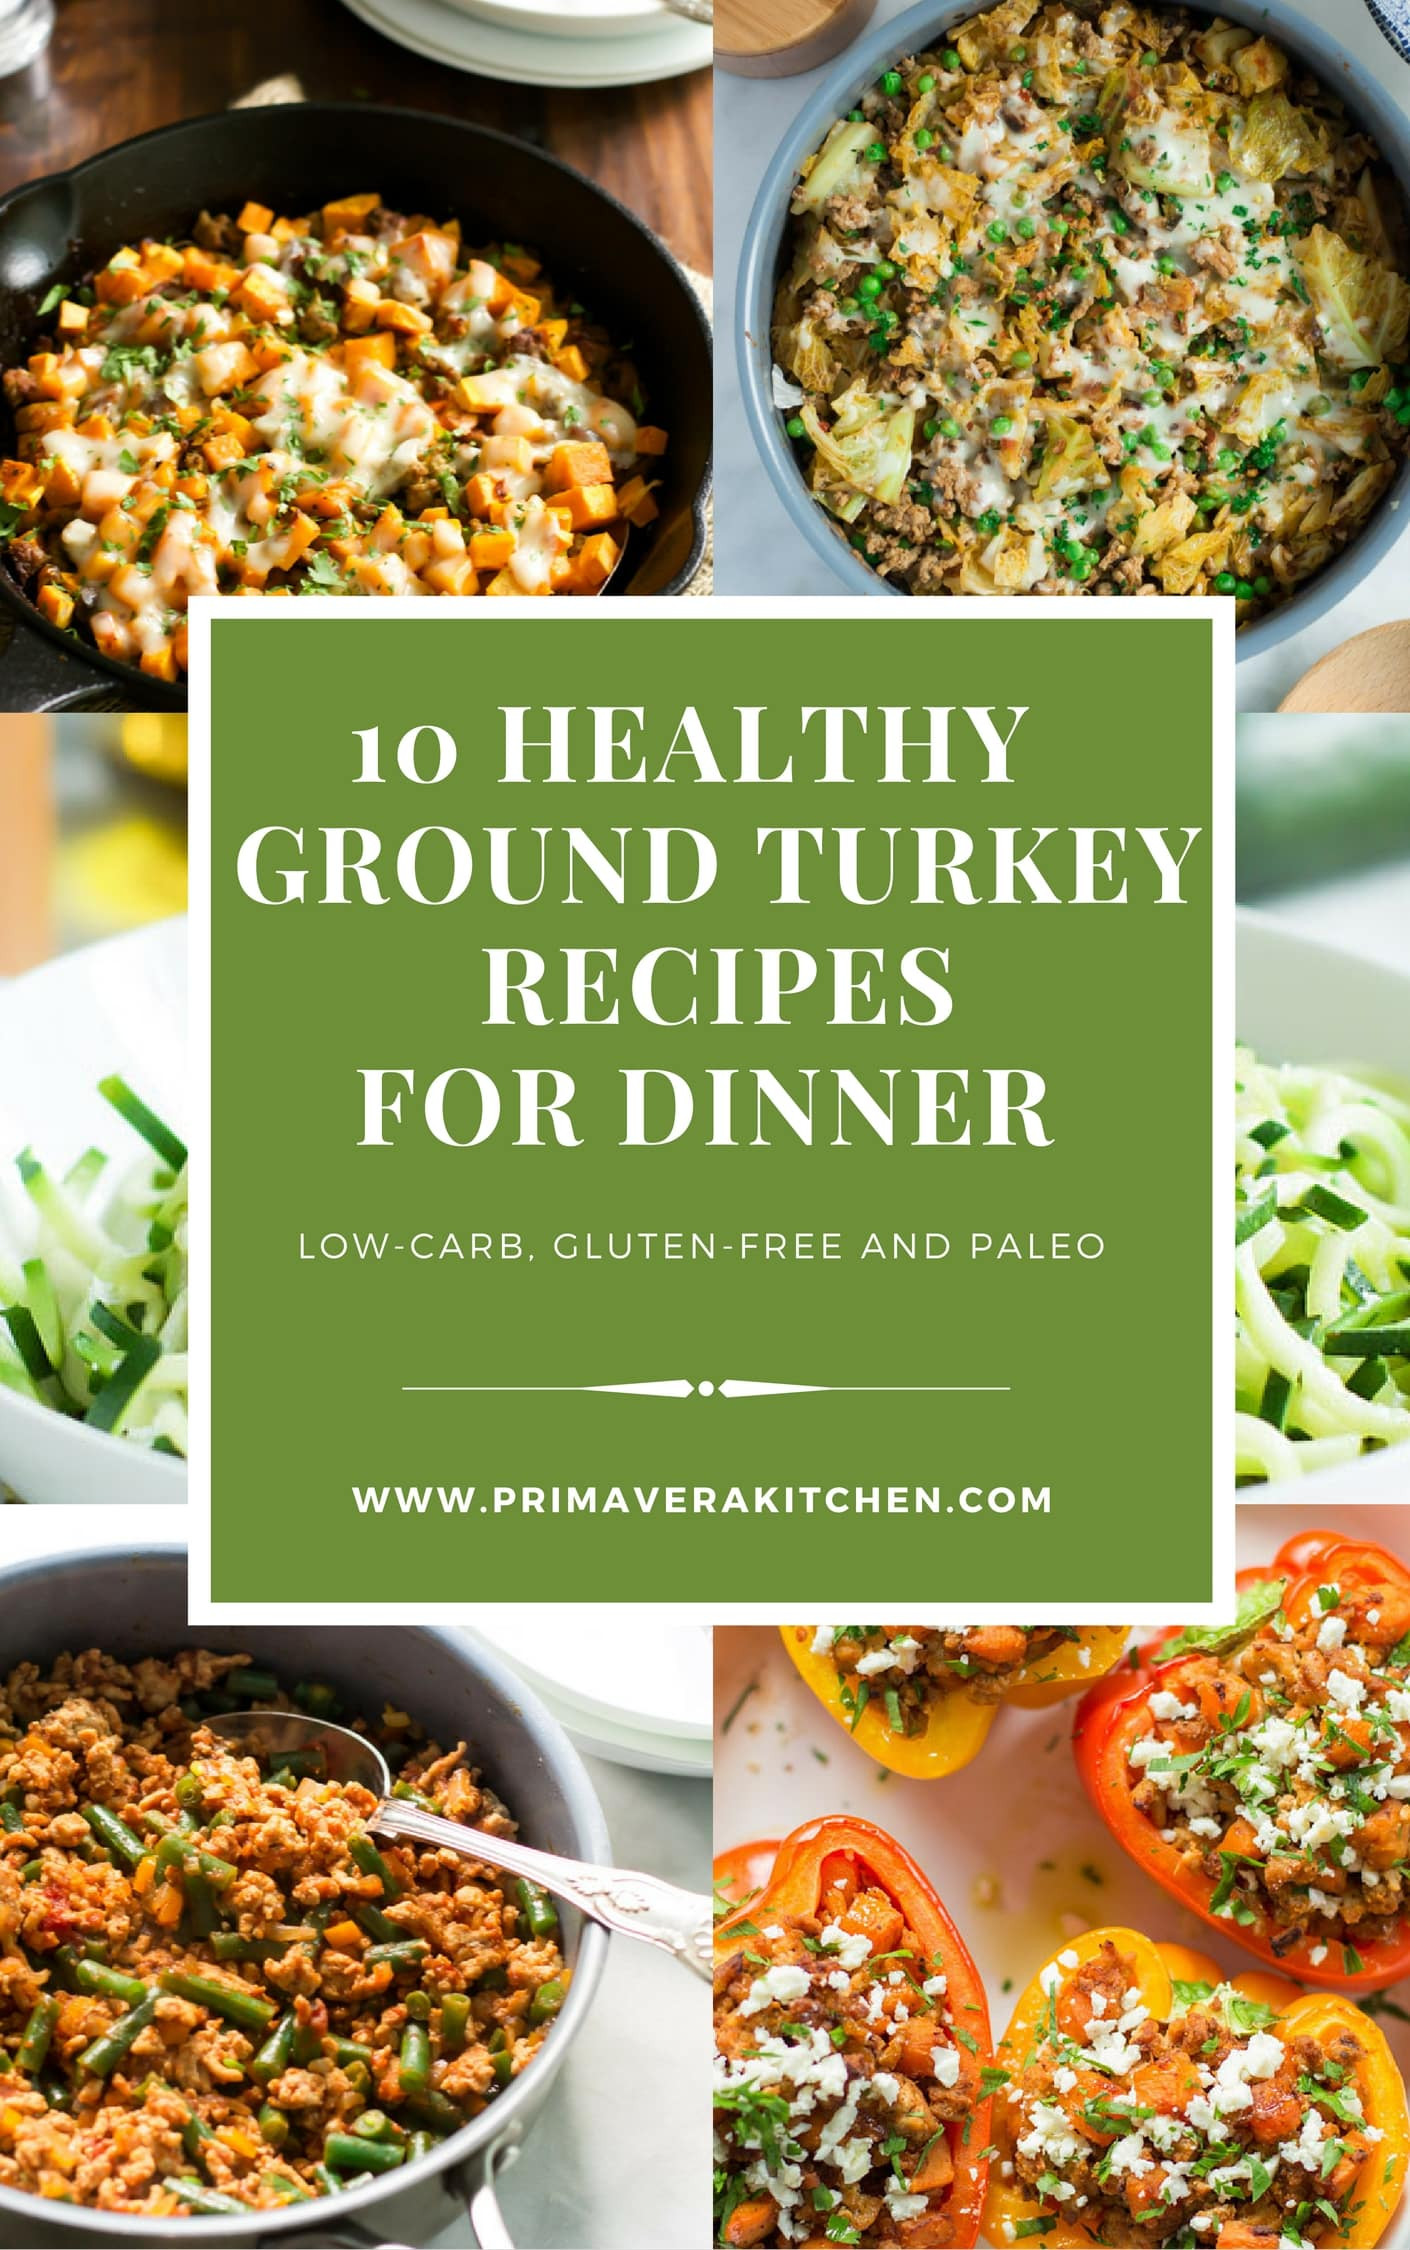 Healthy Dinner Recipes With Ground Turkey
 10 Healthy Ground Turkey Recipes for Dinner Primavera